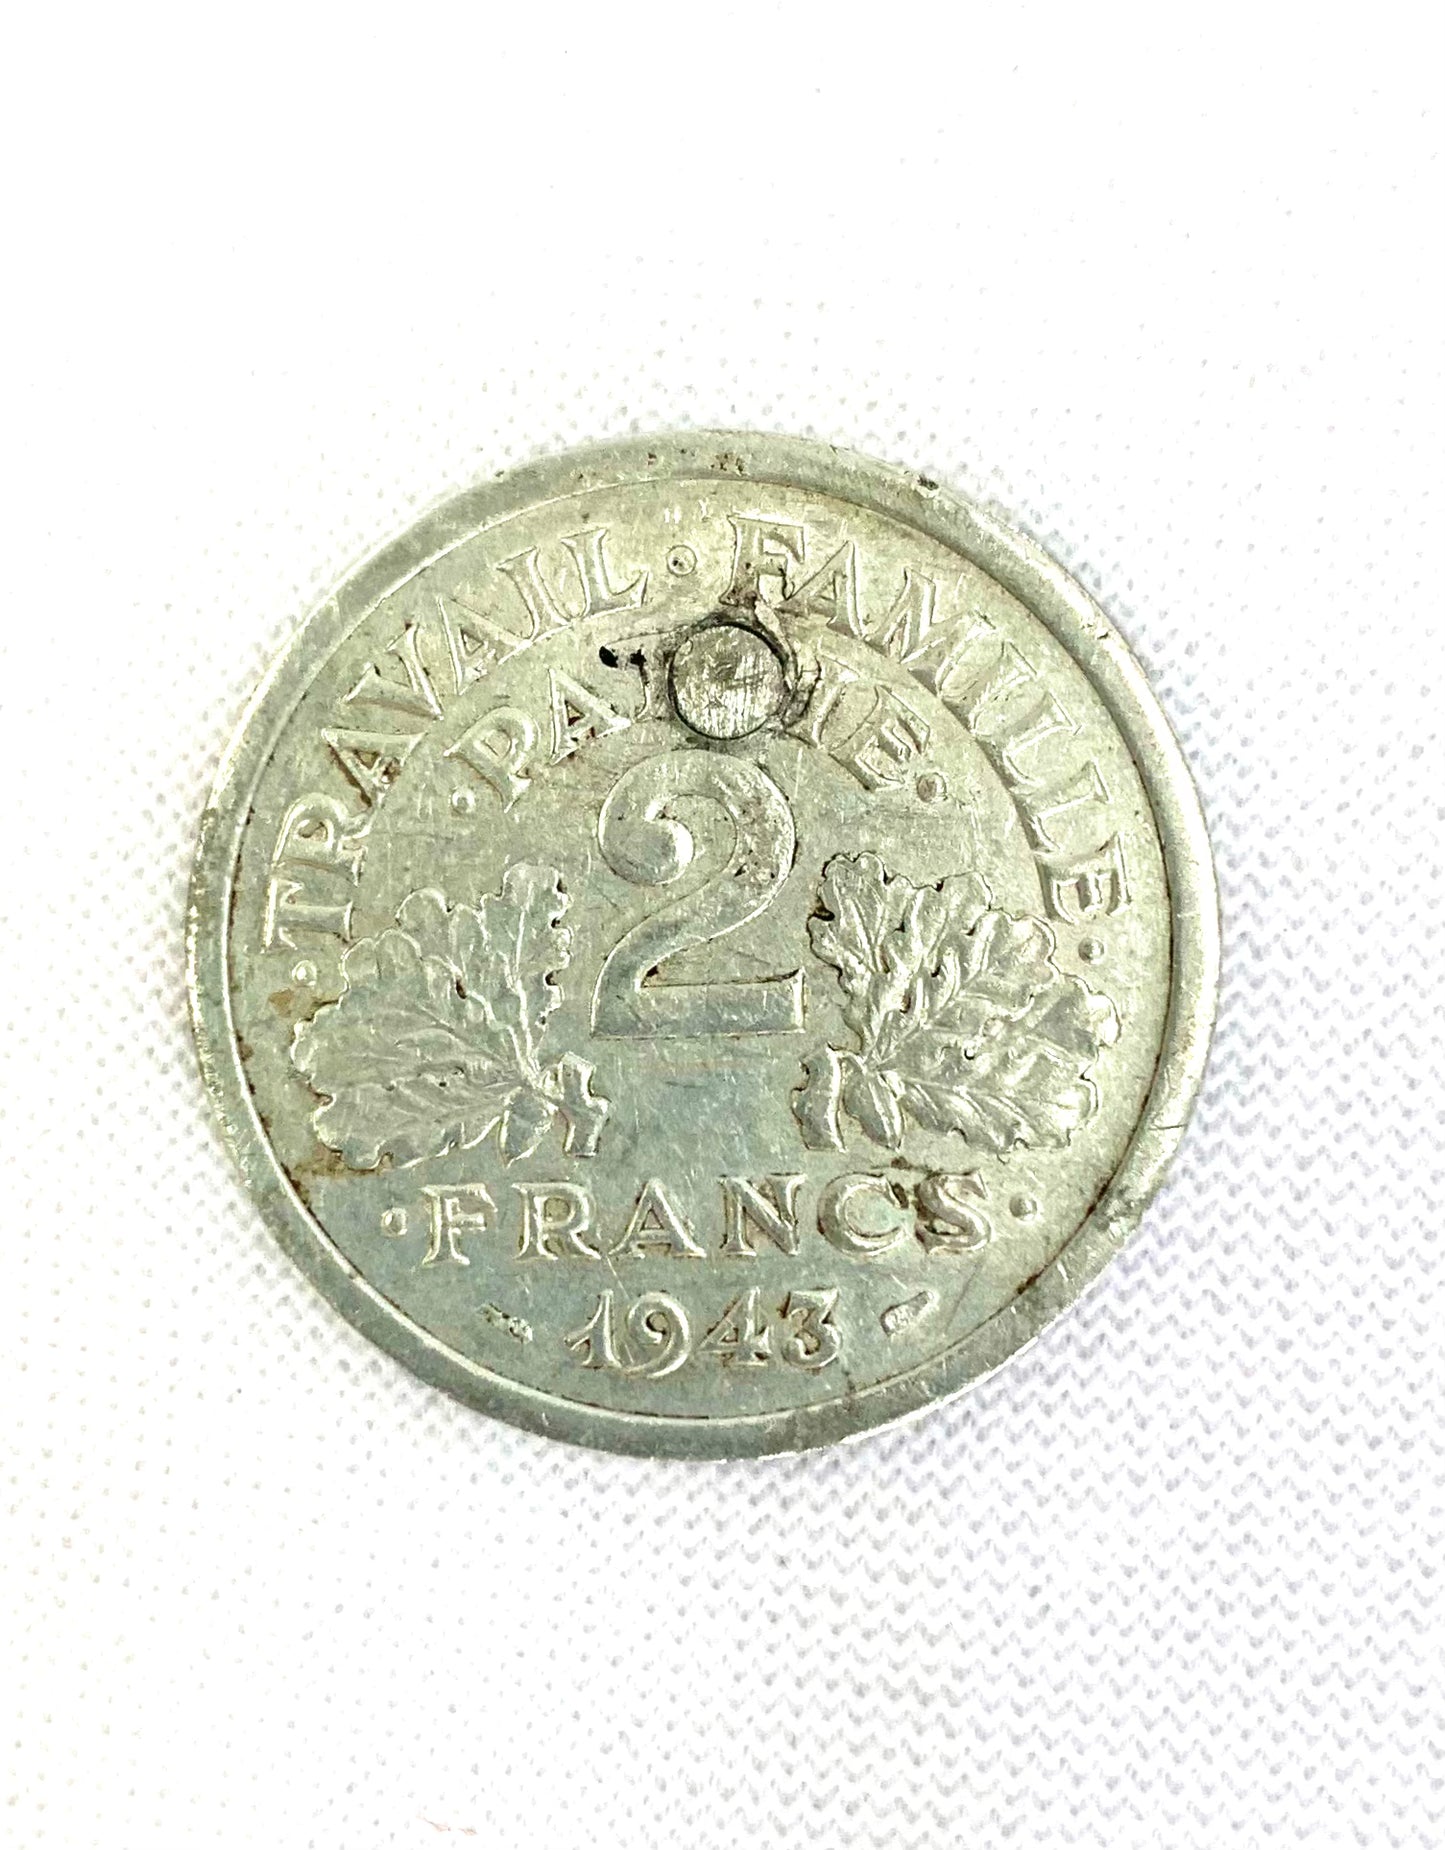 WW2 SOE French 2 Franc Coin with Concealed Blade. Dated 1943